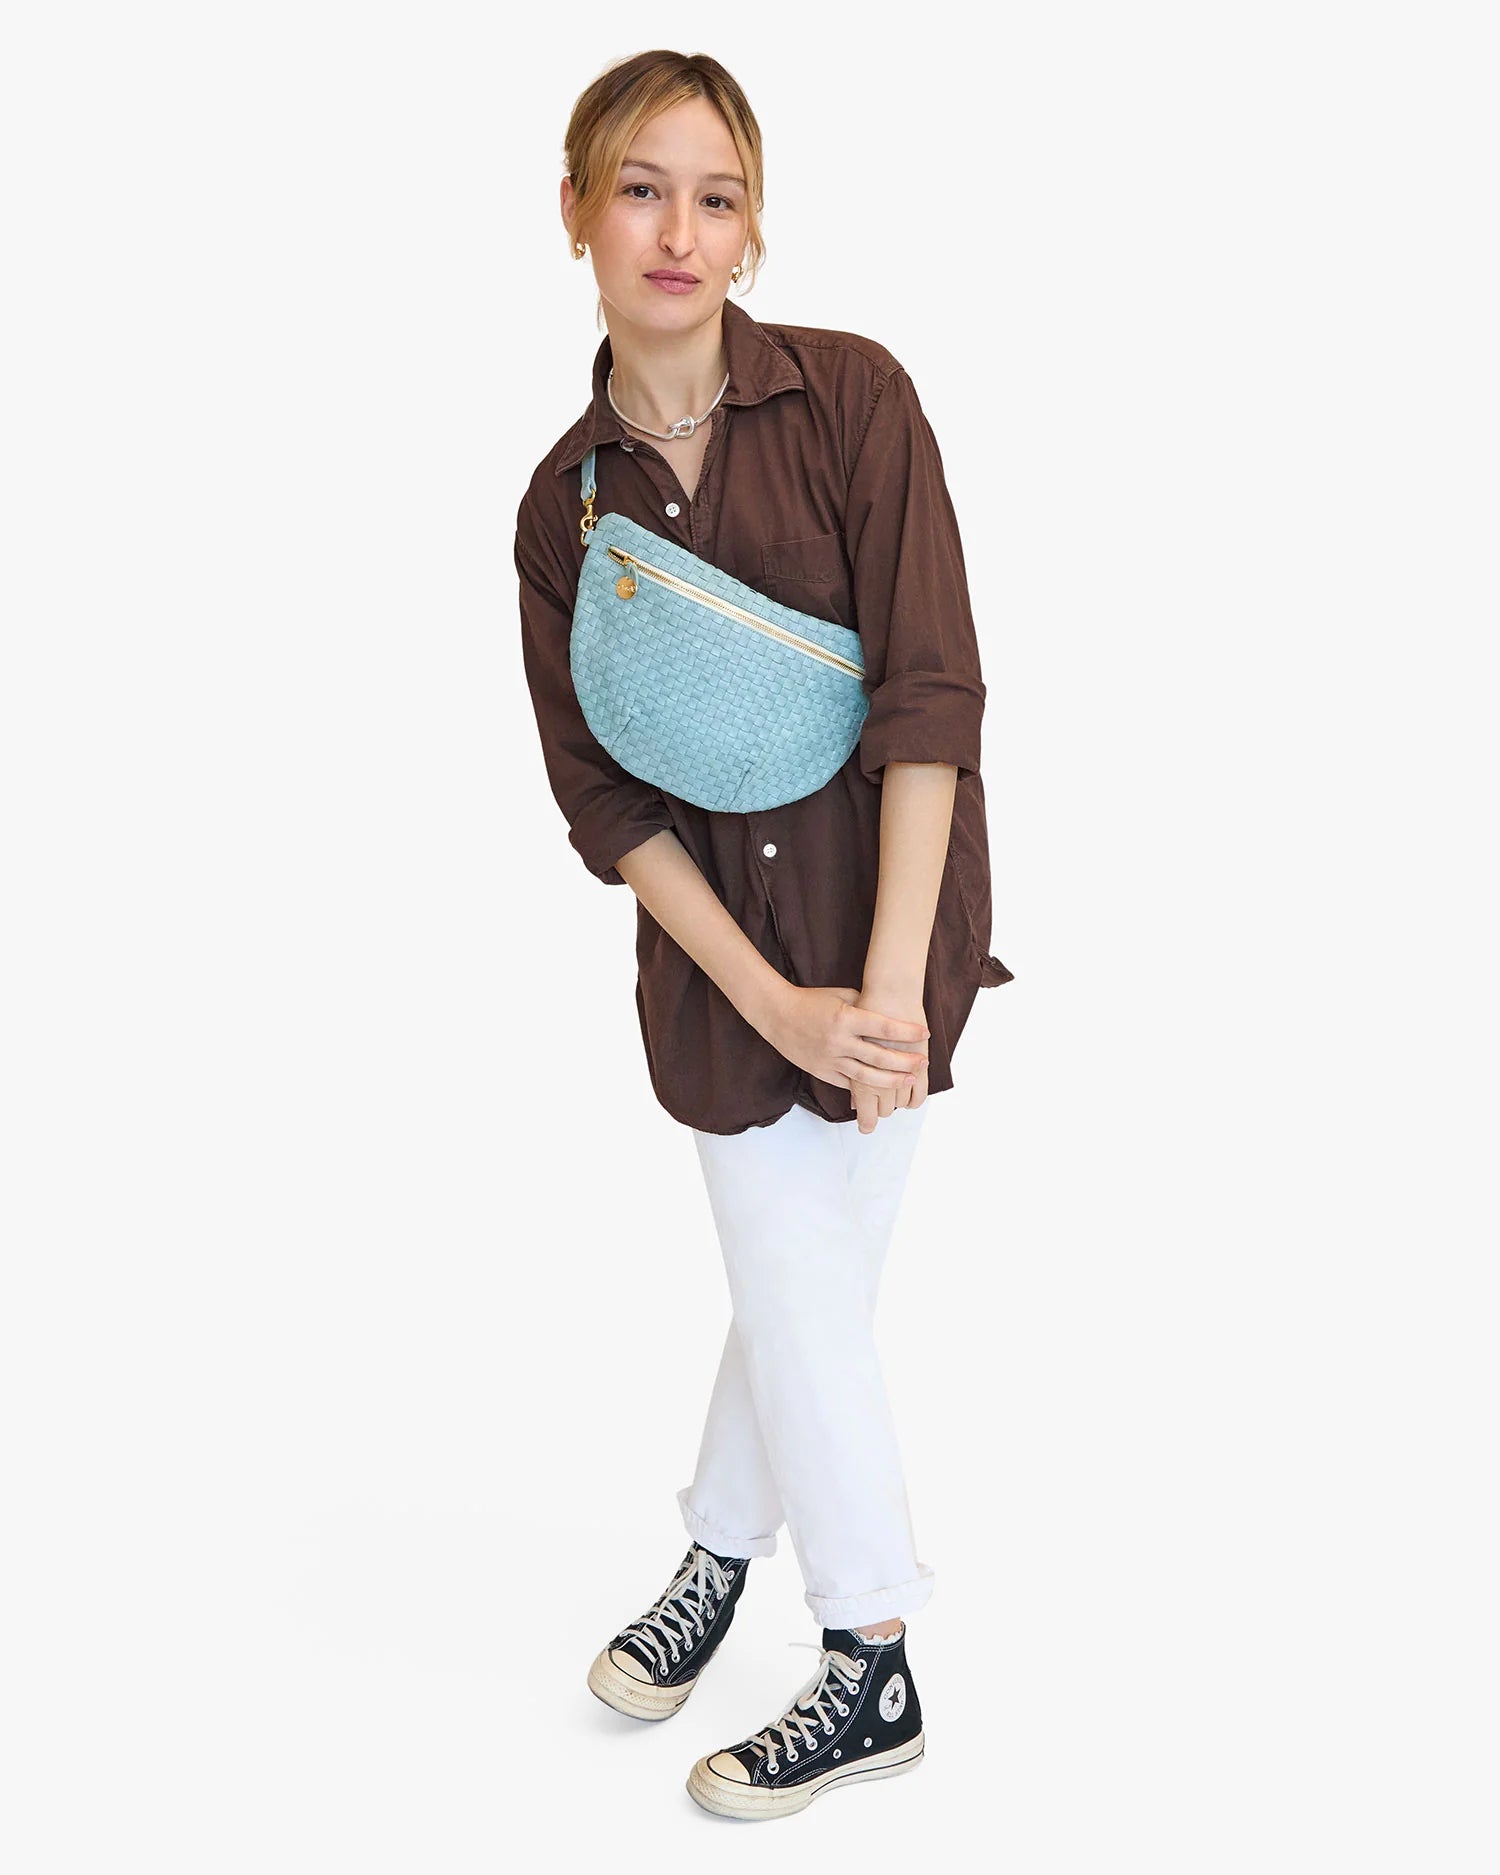 A young woman in a casual outfit, with a brown shirt, white pants, and black sneakers, poses with a Clare Vivier Grande Fanny Woven Checker featuring an adjustable strap, standing against a plain white background.